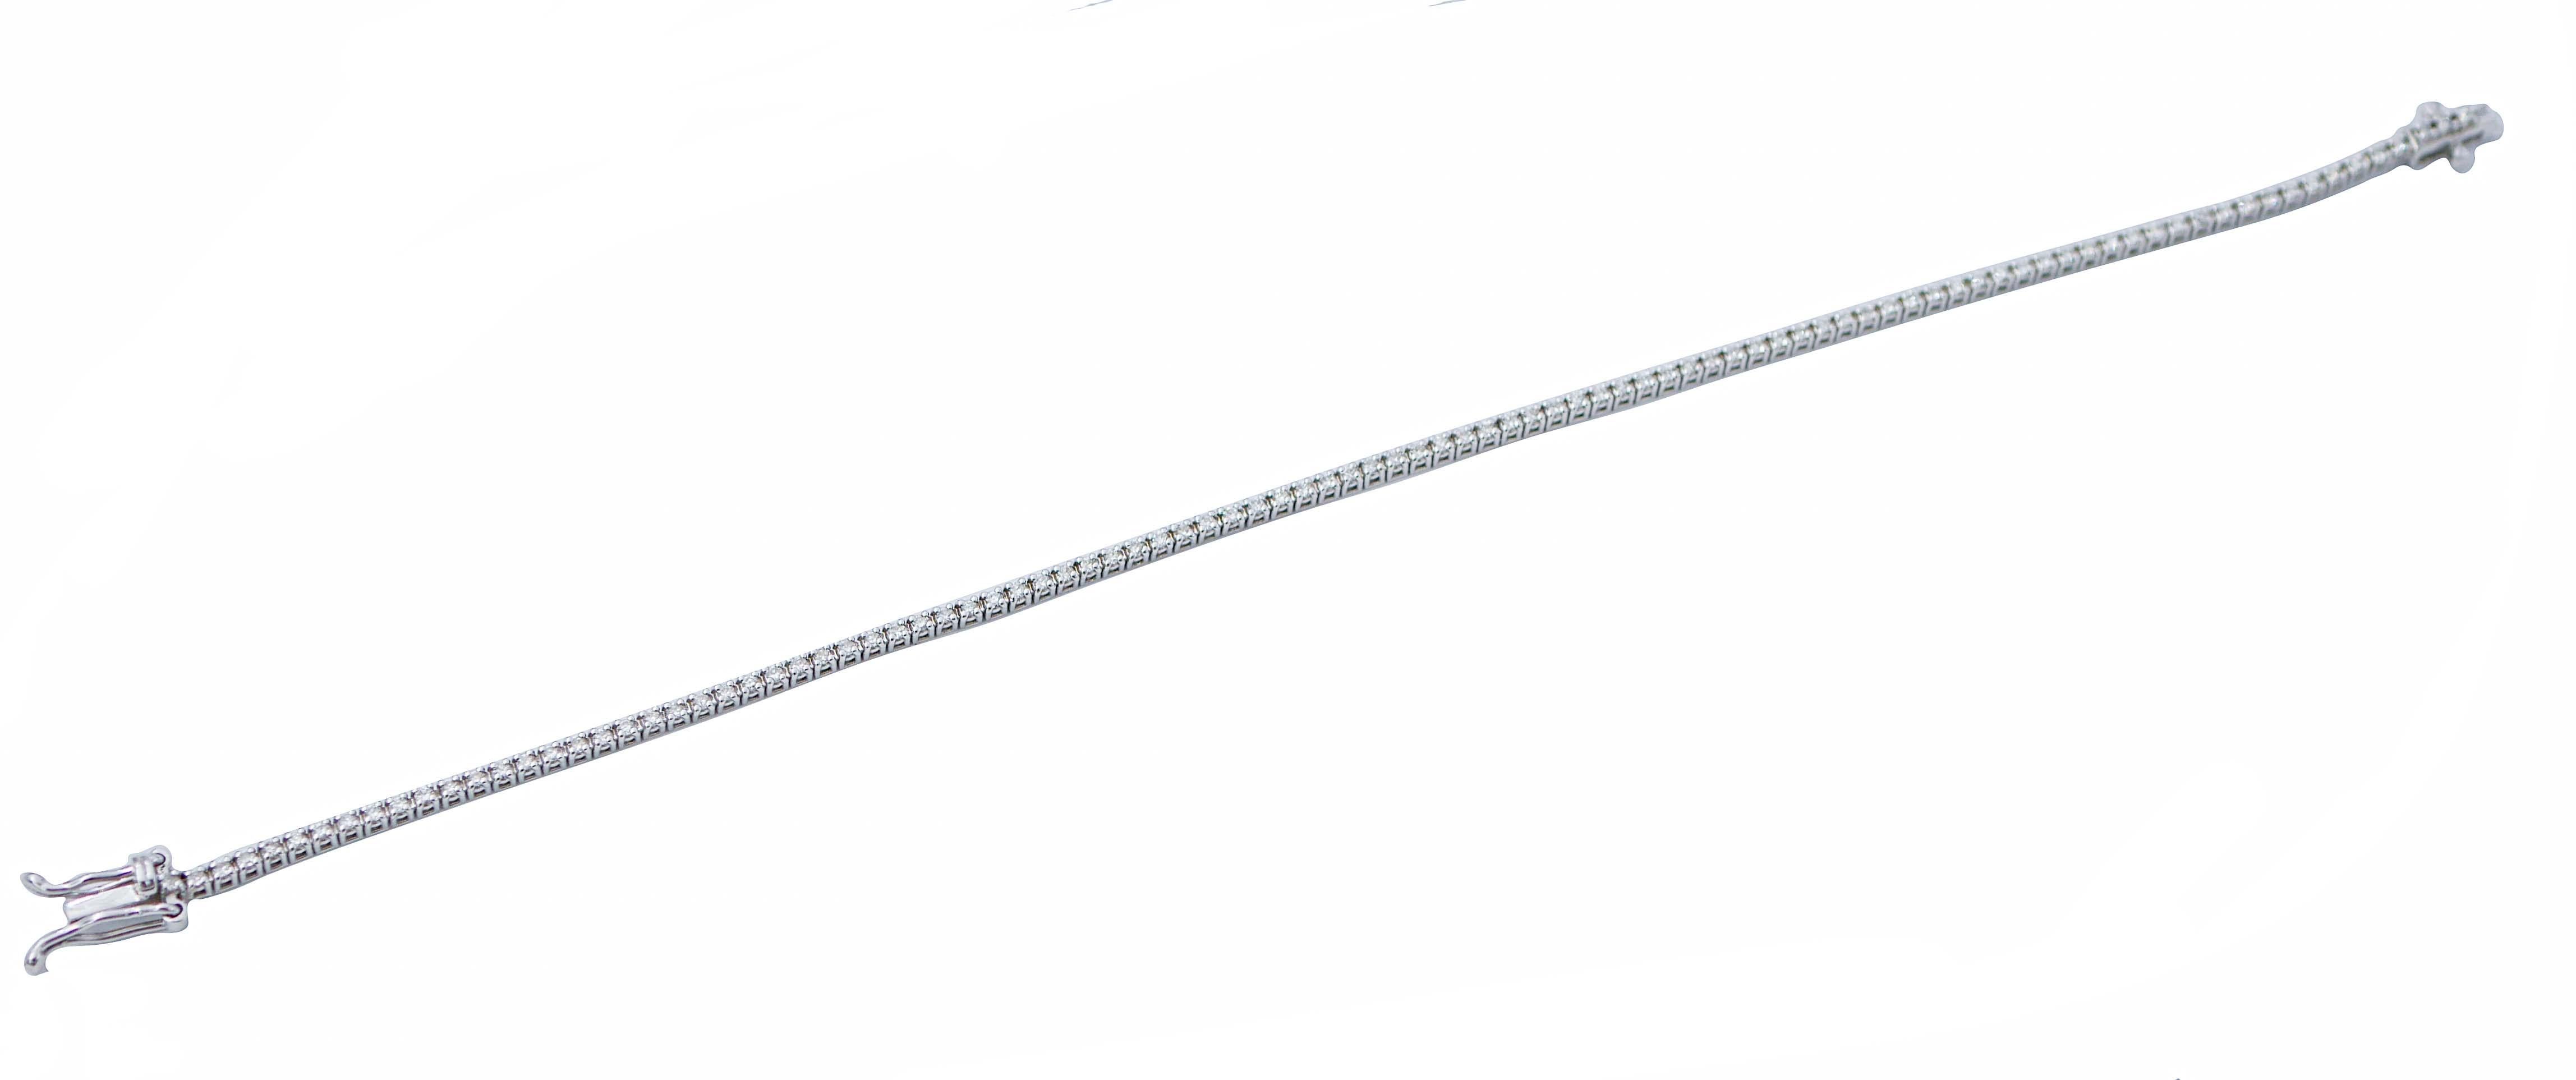 SHIPPING POLICY: 
 Shipping costs will be totally covered by the seller

Elegant tennis bracelet in 14 kt white gold structure mounted with diamonds.
This bracelet was totally handmade by Italian master goldsmiths and it is in perfect